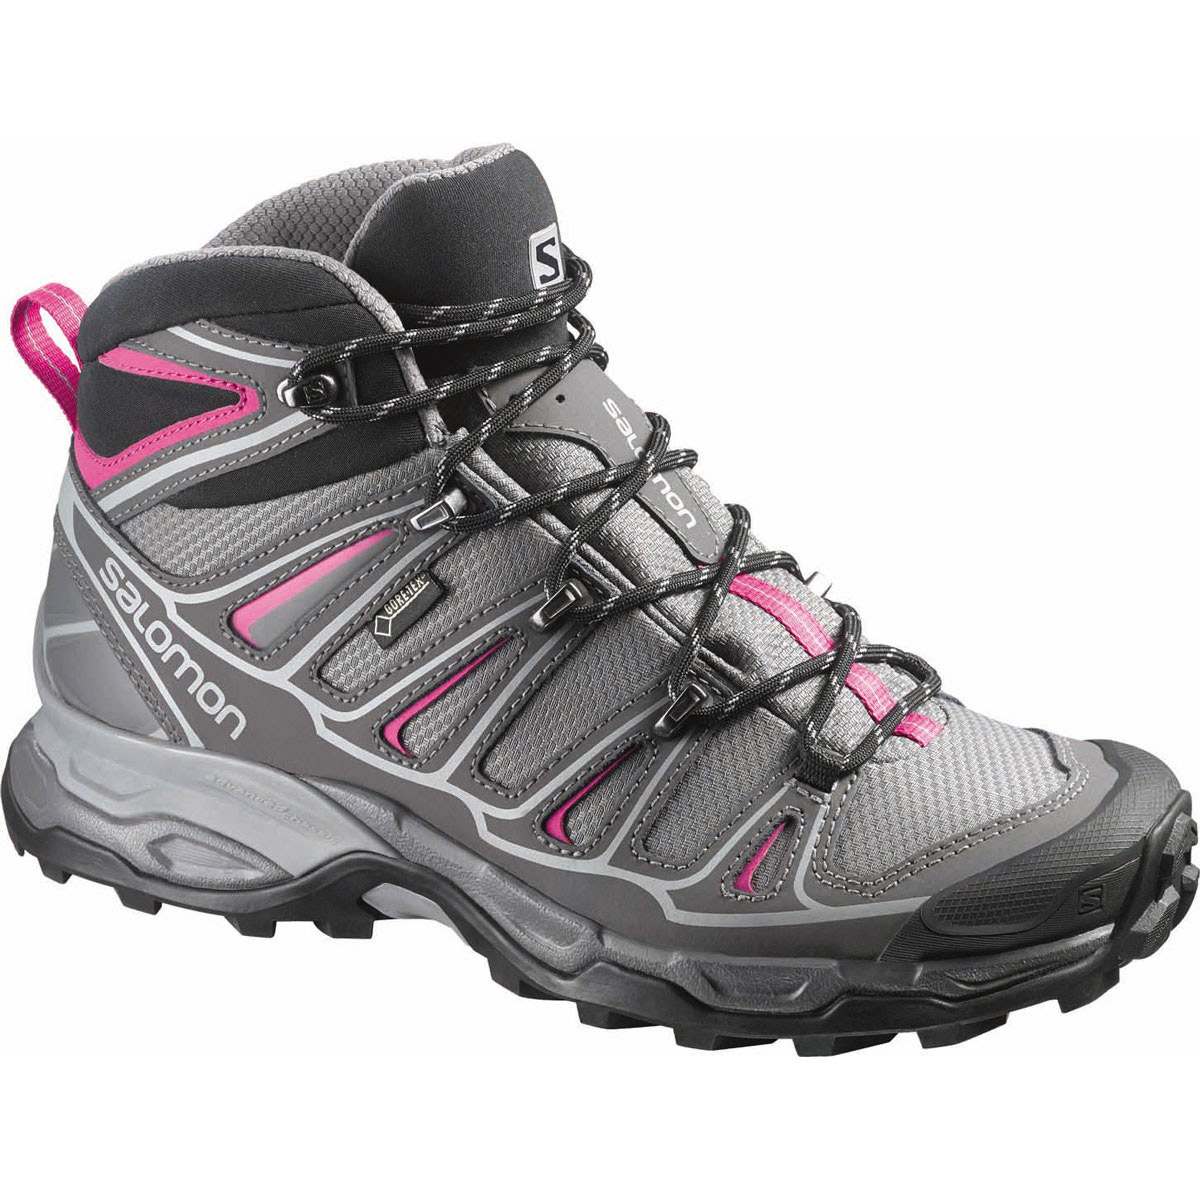 Shop Hiking Boots Sale UP TO 50% OFF